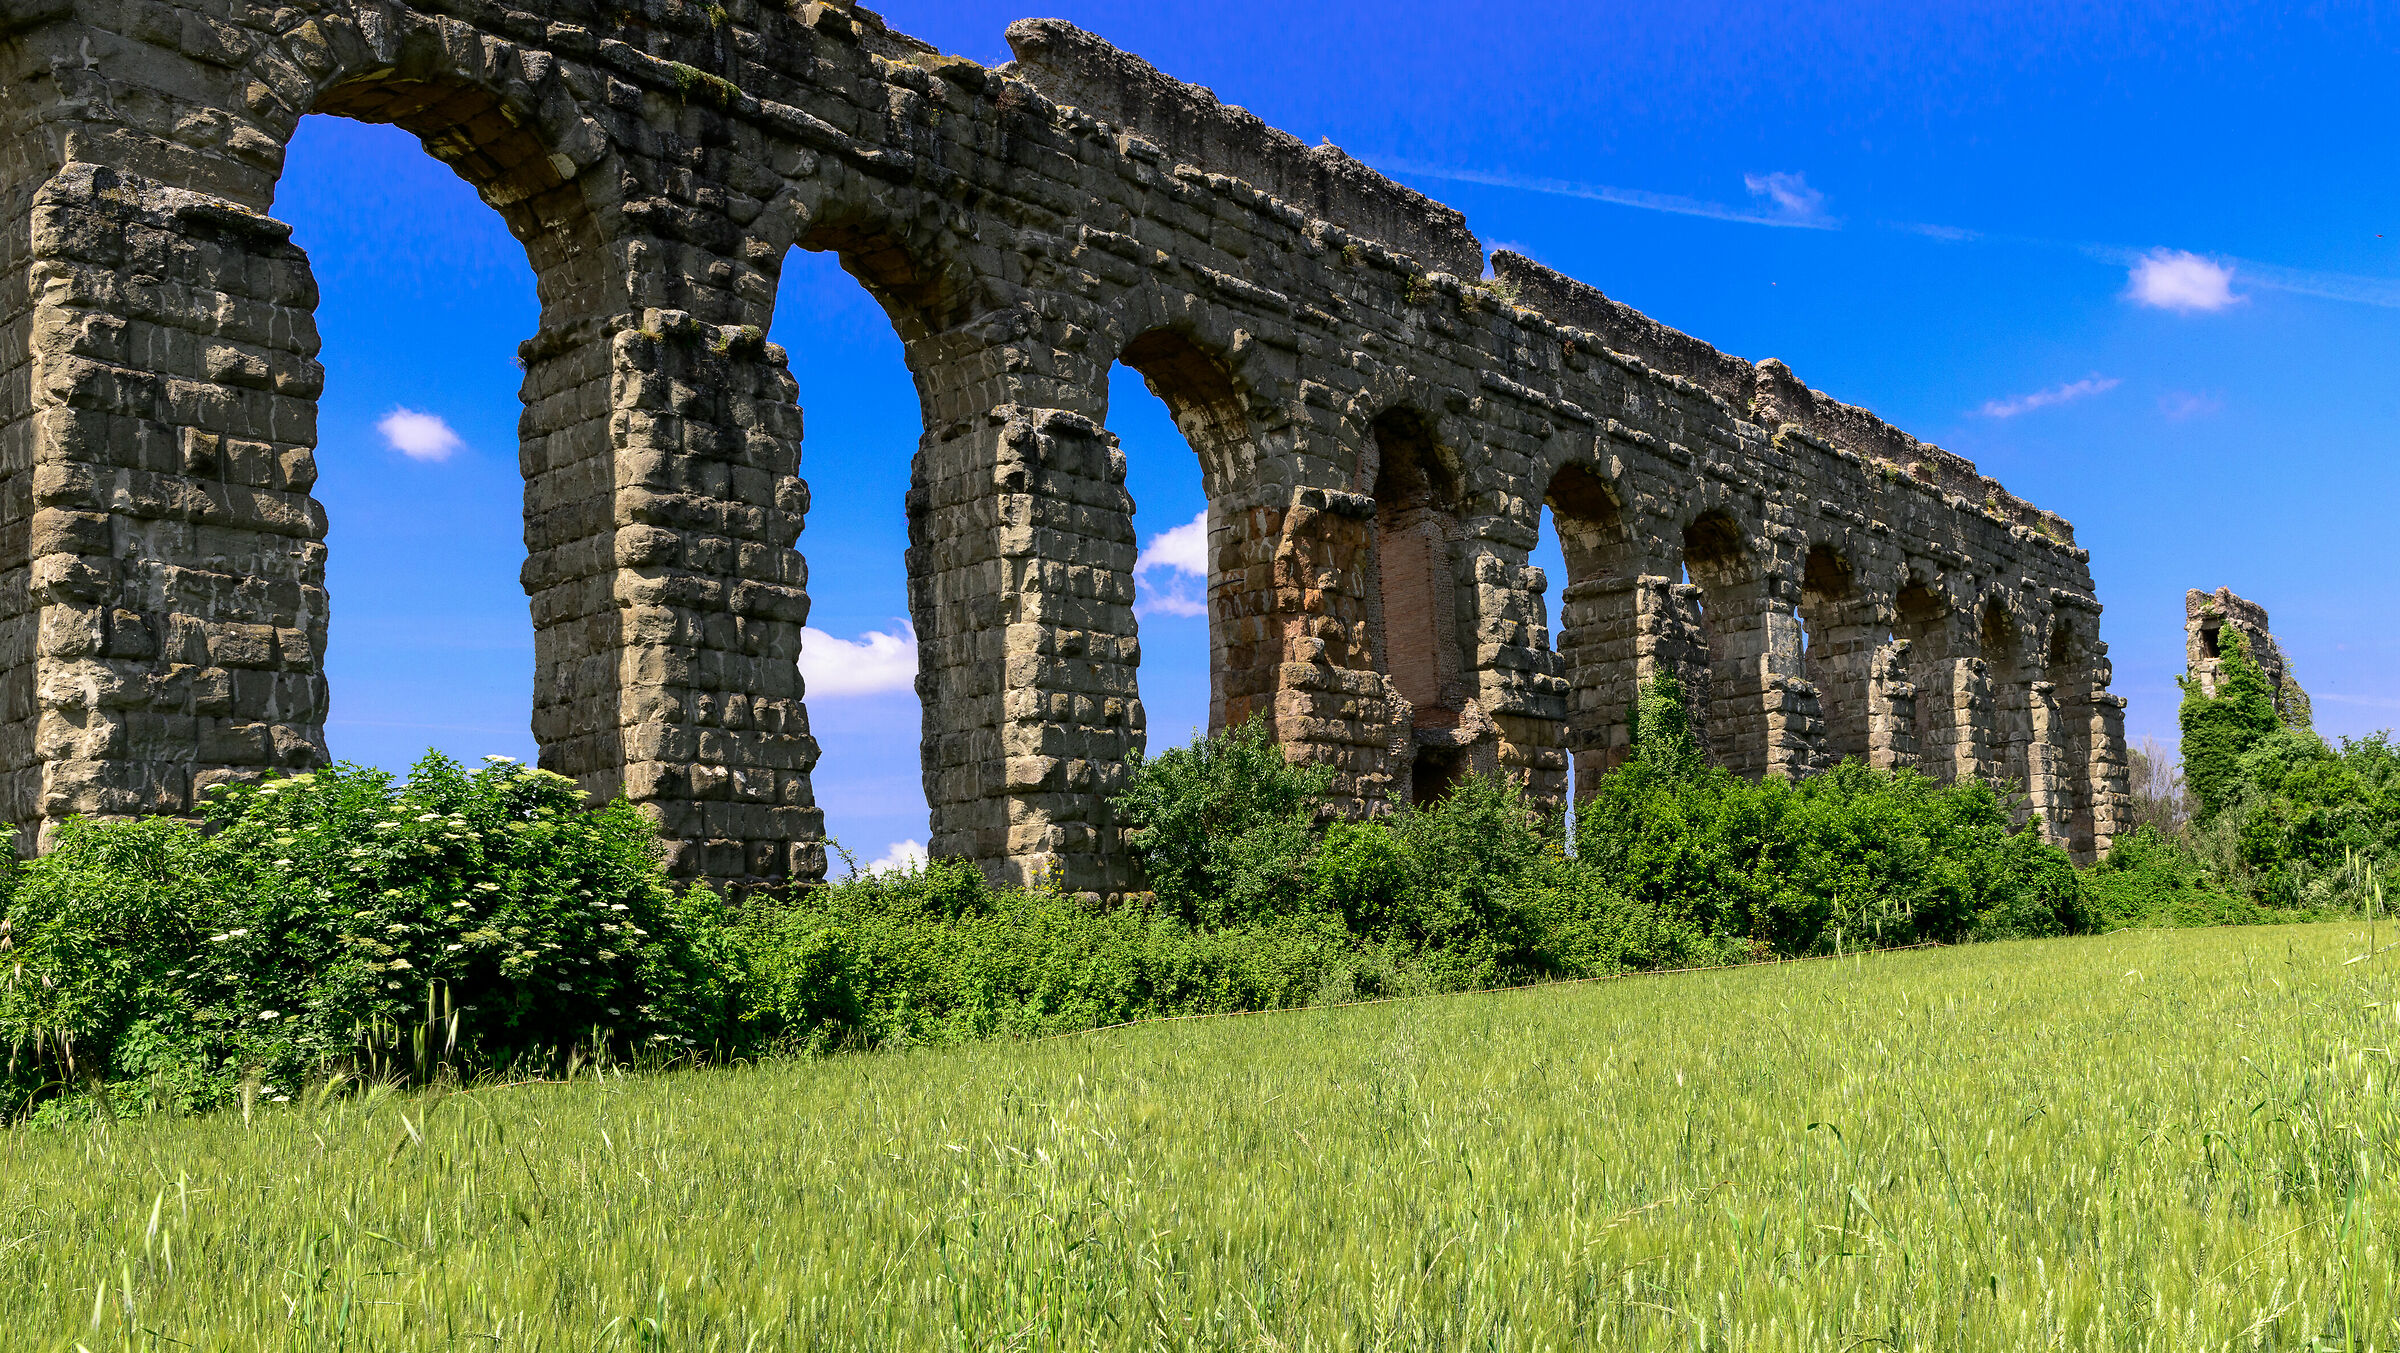 Rome-Park of the aqueducts...